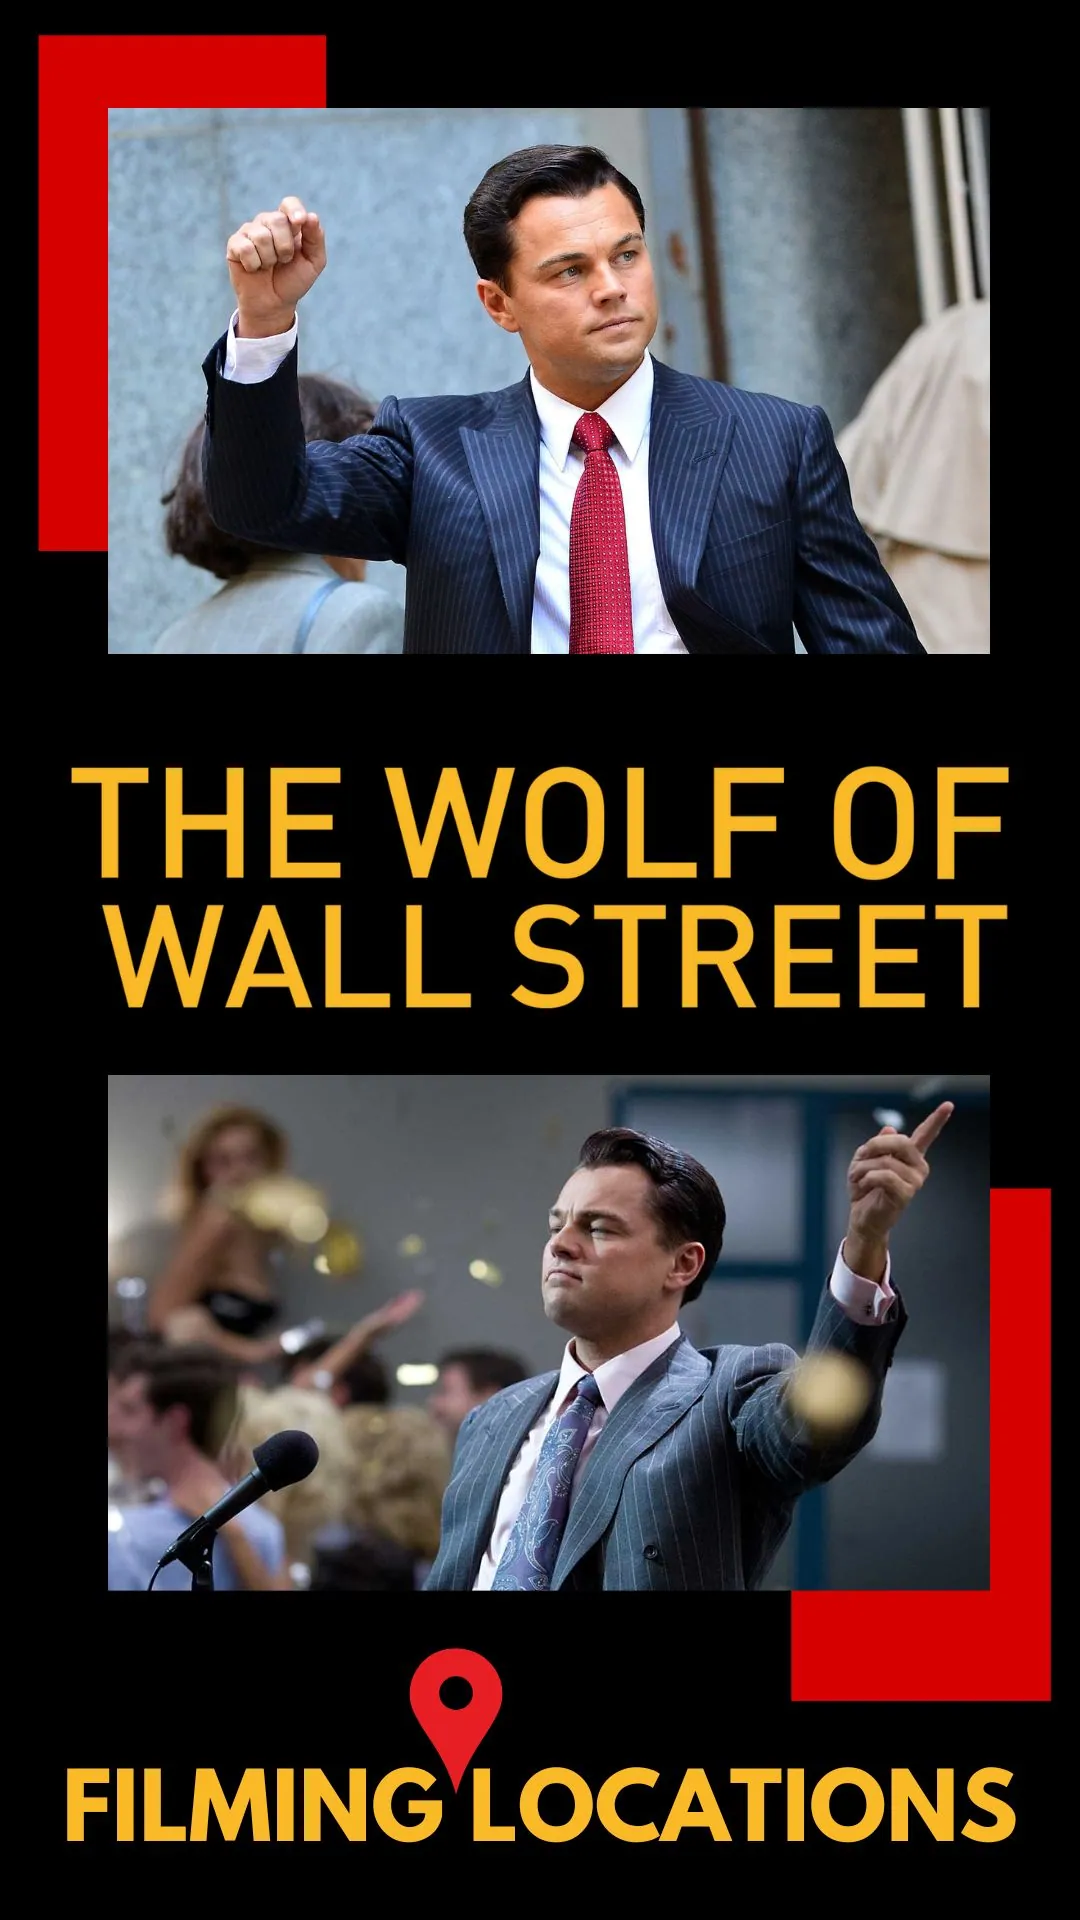 The Wolf of Wall Street Filming Locations